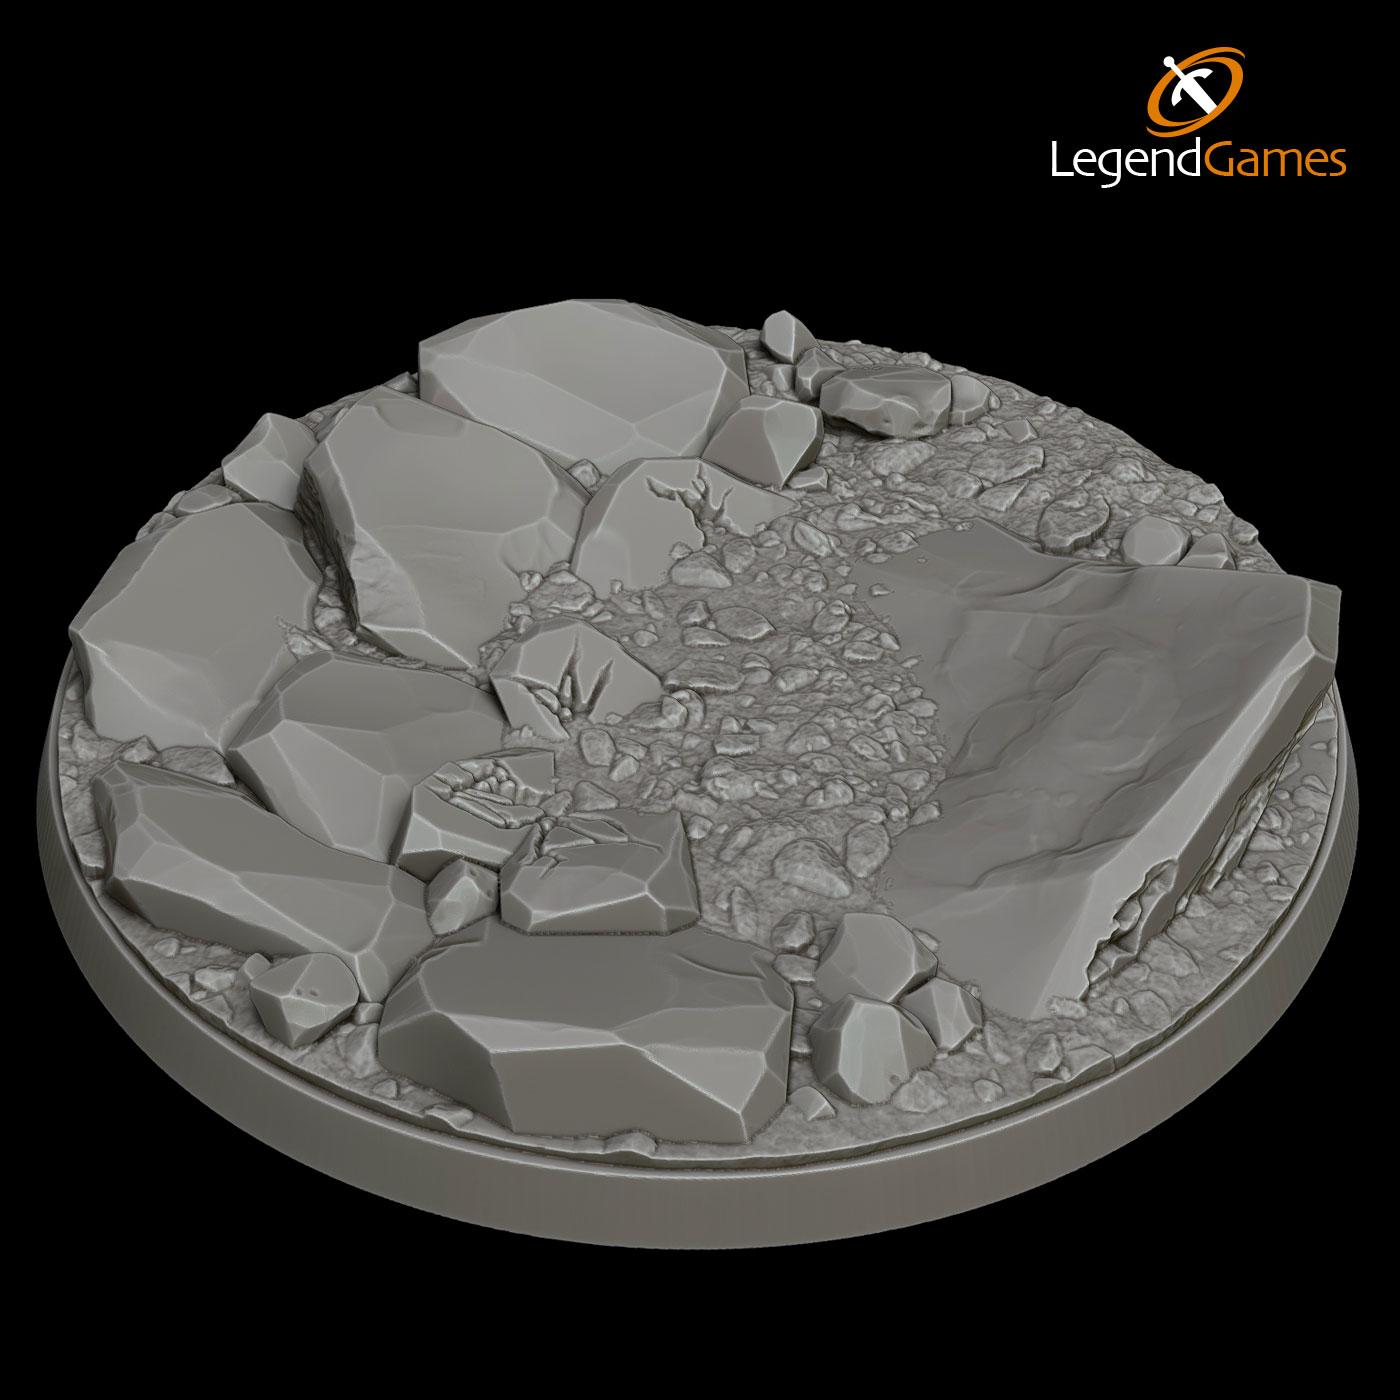 Picture of 80mm Round Rock Base for Warhammer Age of Sigmar and similar games STL file - Main Image